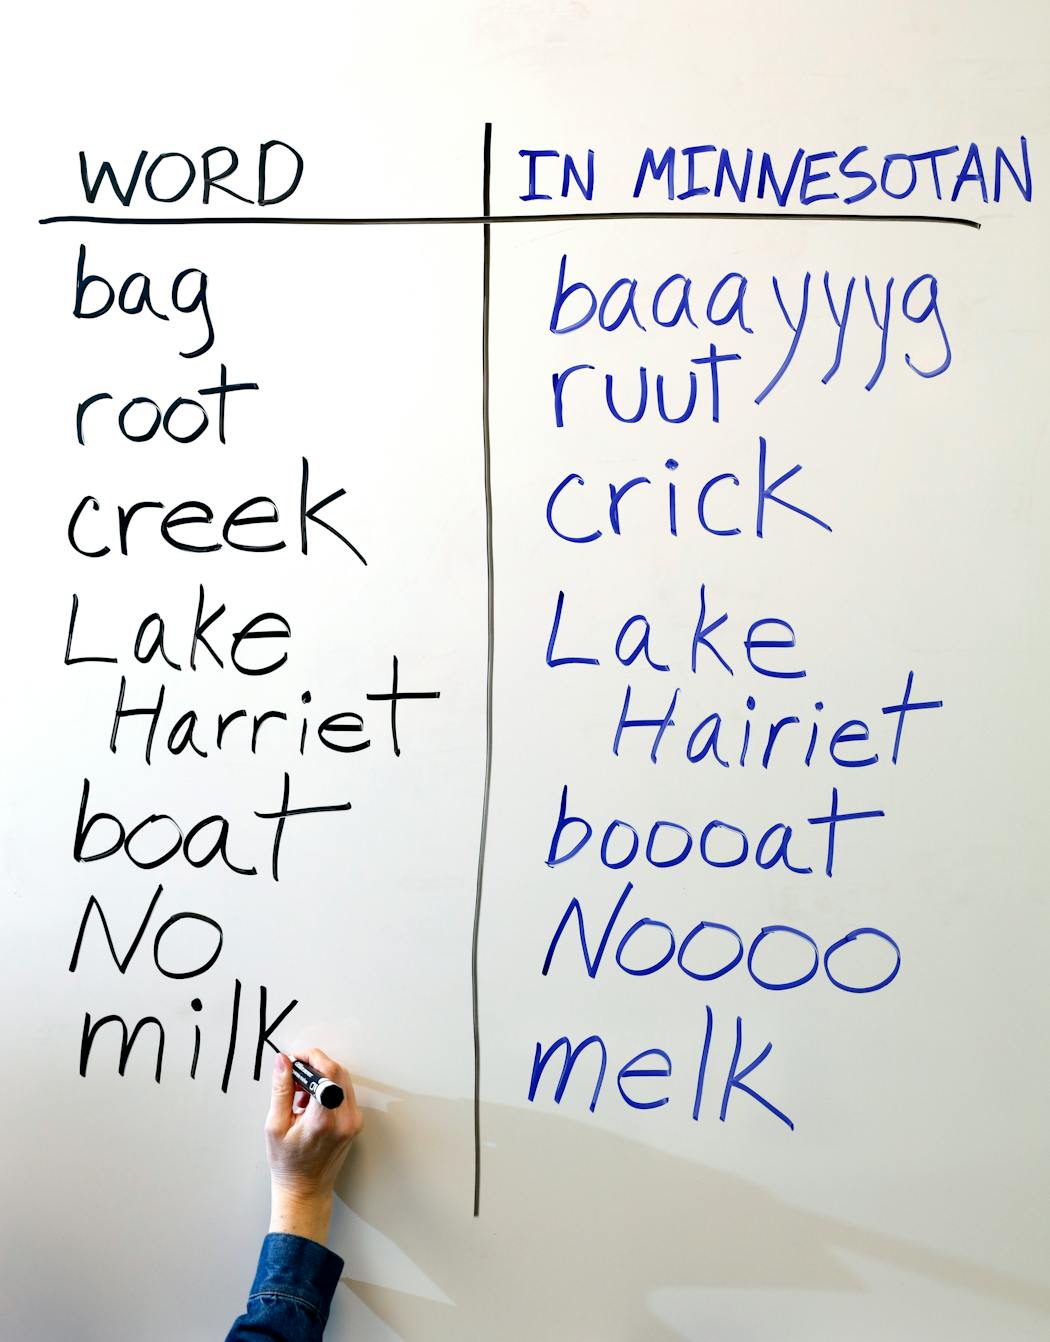 This 2016 photo illustration features words that are pronounced differently with a Minnesota accent.